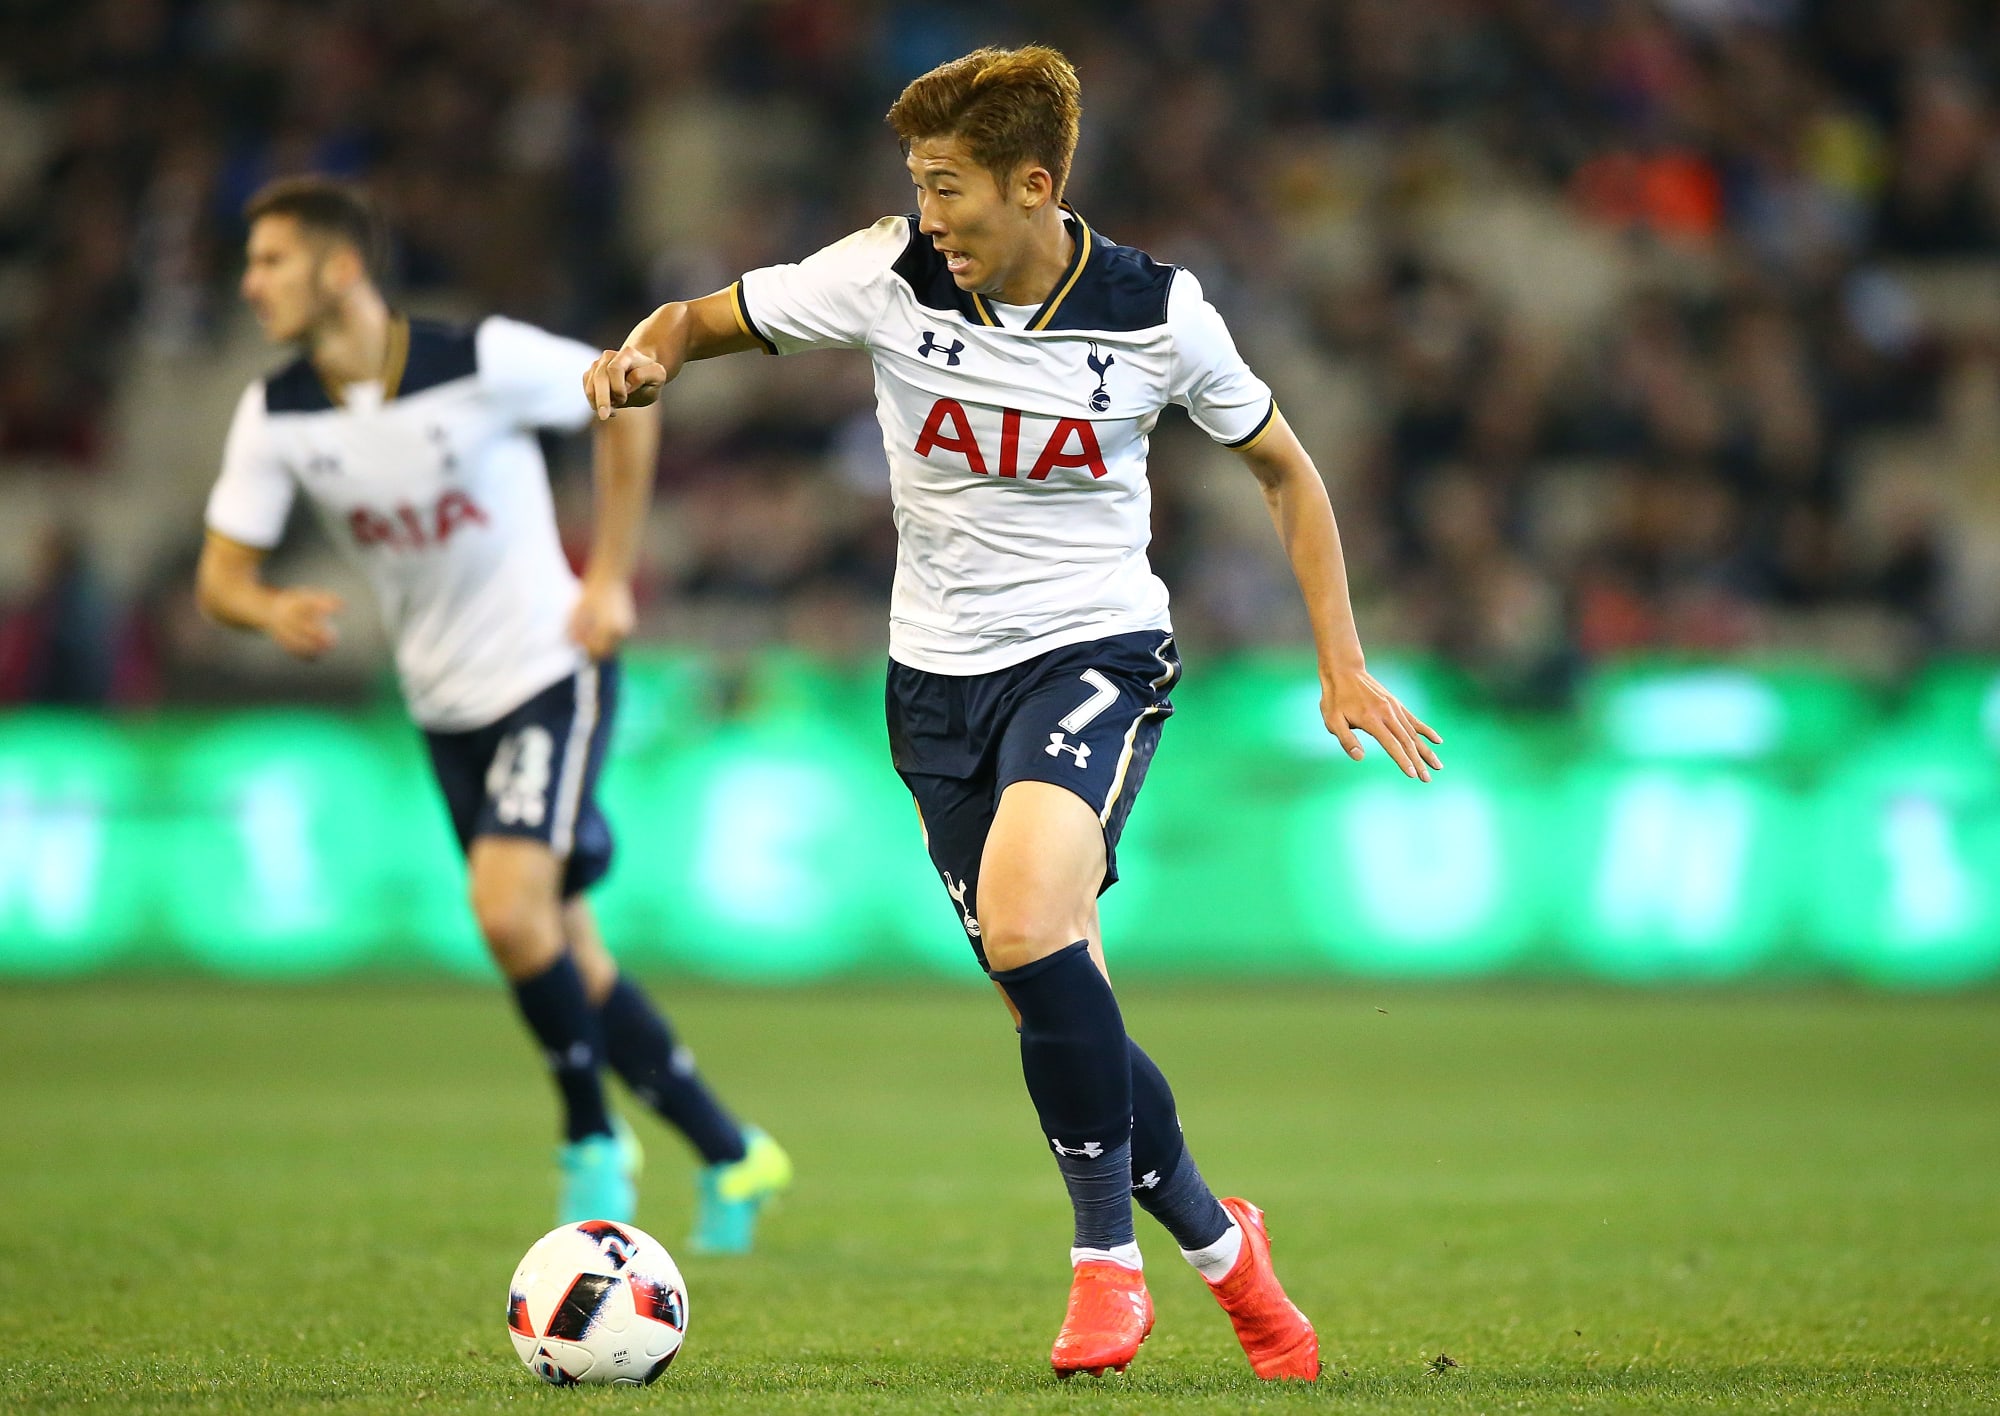 Tottenham's Son Hoping to Win a Medal in the Olympics